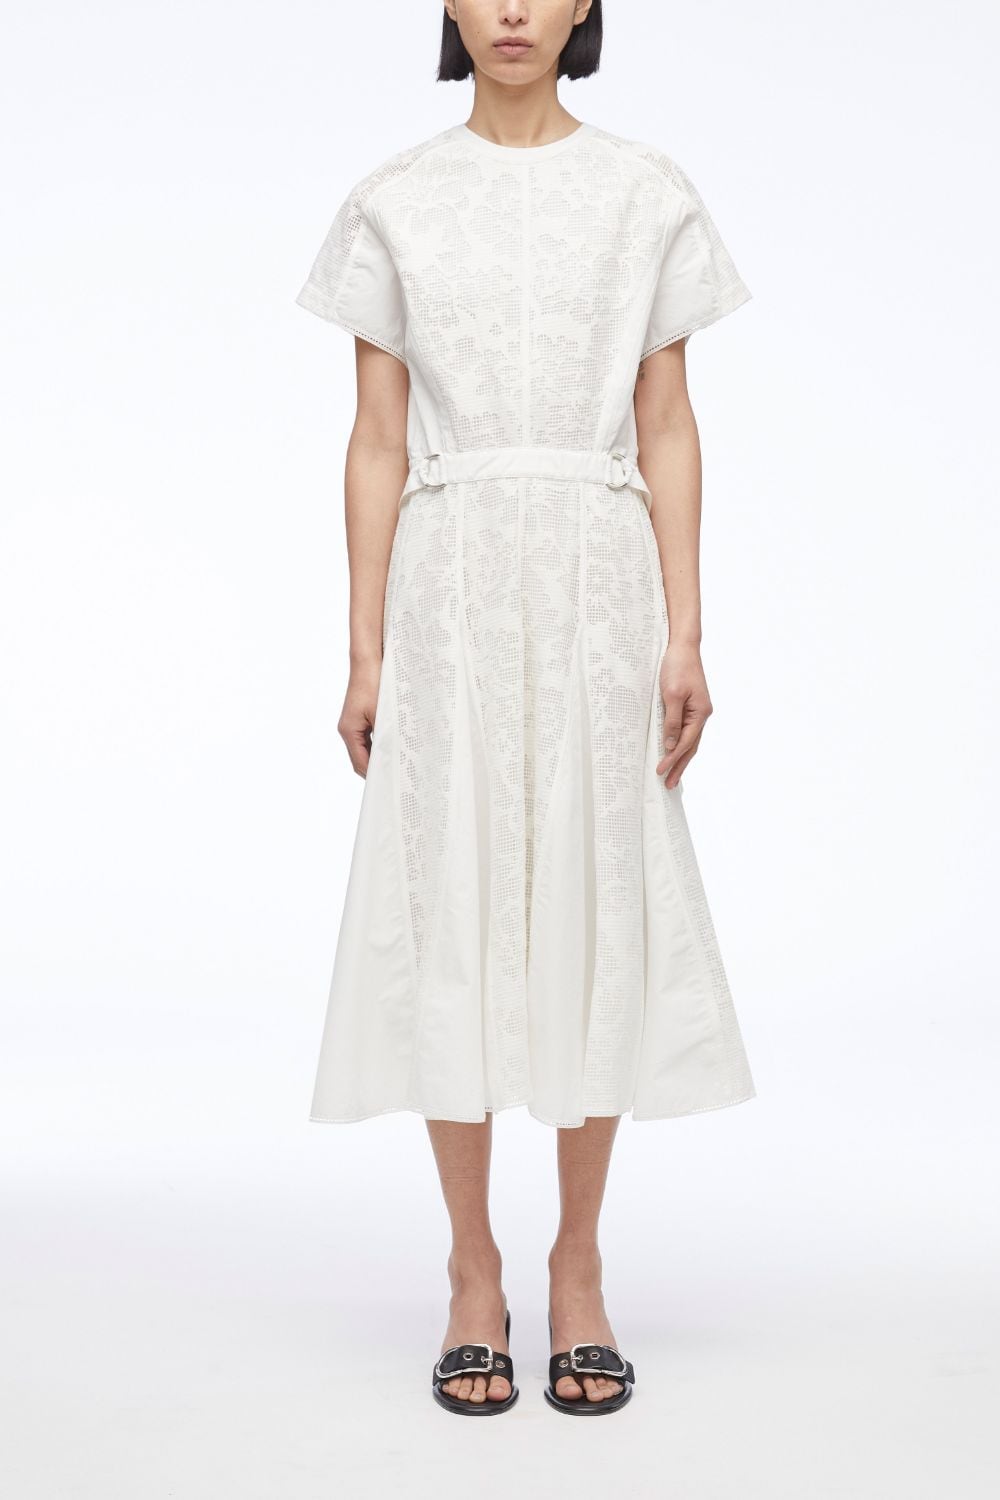 Bonded Lace Pleated Combo Dress in white | 3.1 Phillip Lim Official Site